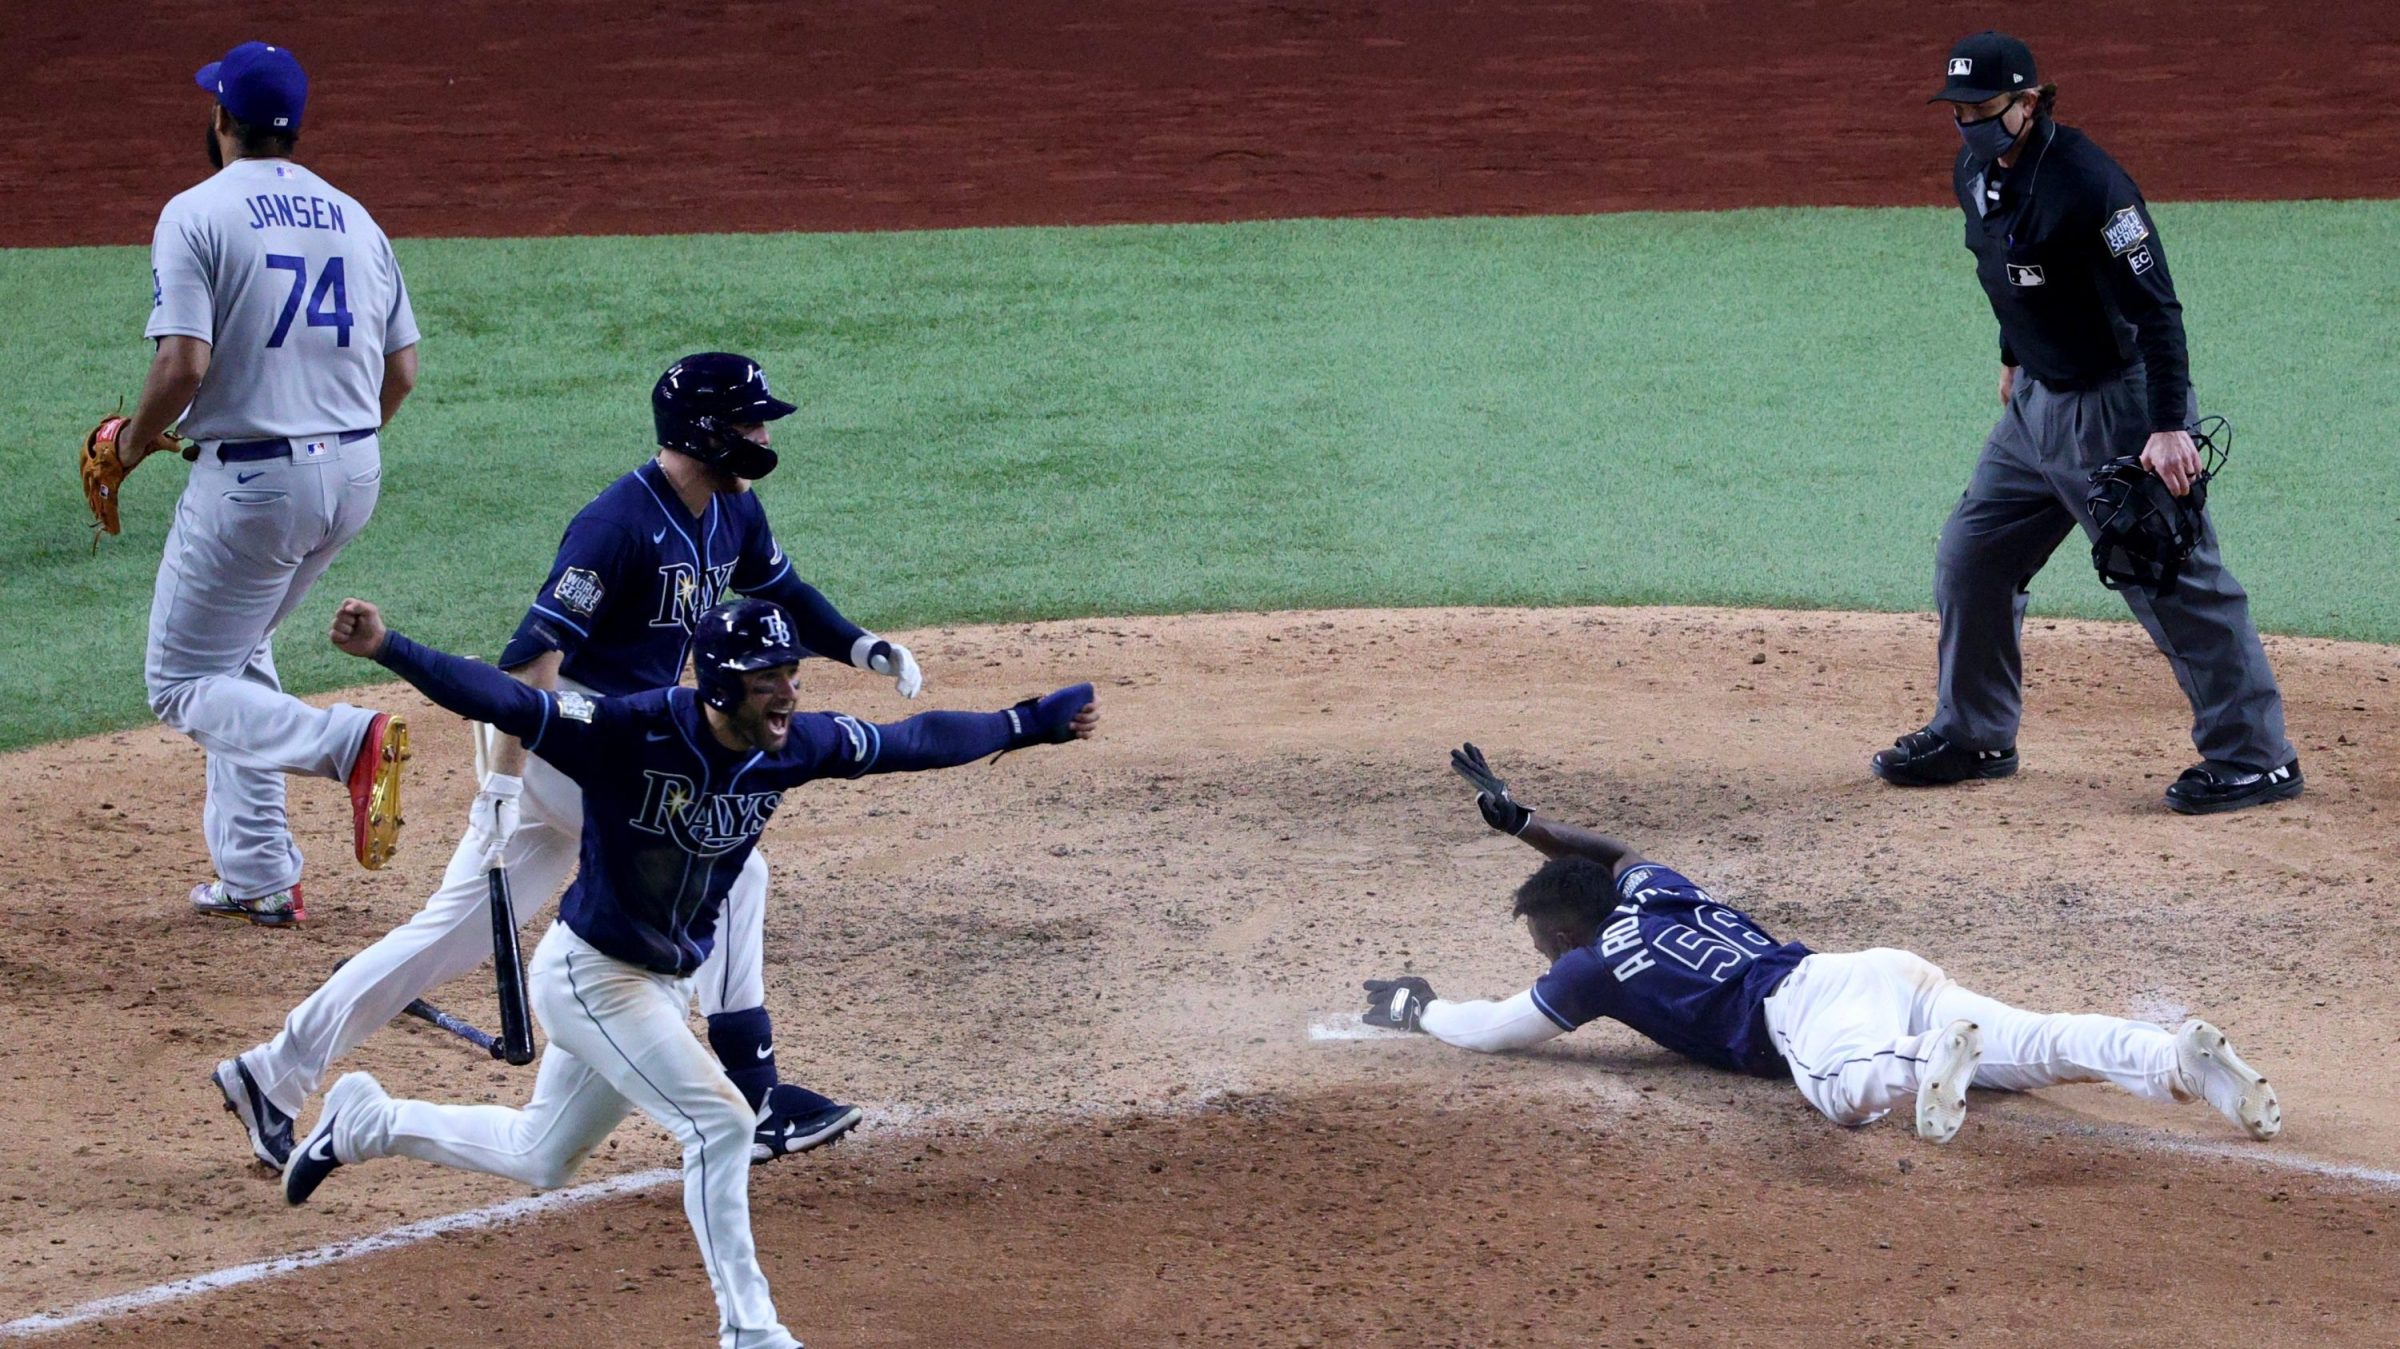 Randy Arozarena #56 of the Tampa Bay Rays slides into home plate during the ninth inning to score the game winning run to give his team the 8-7 victory as Kevin Kiermaier celebrates against the Los Angeles Dodgers in Game Four of the 2020 MLB World Series